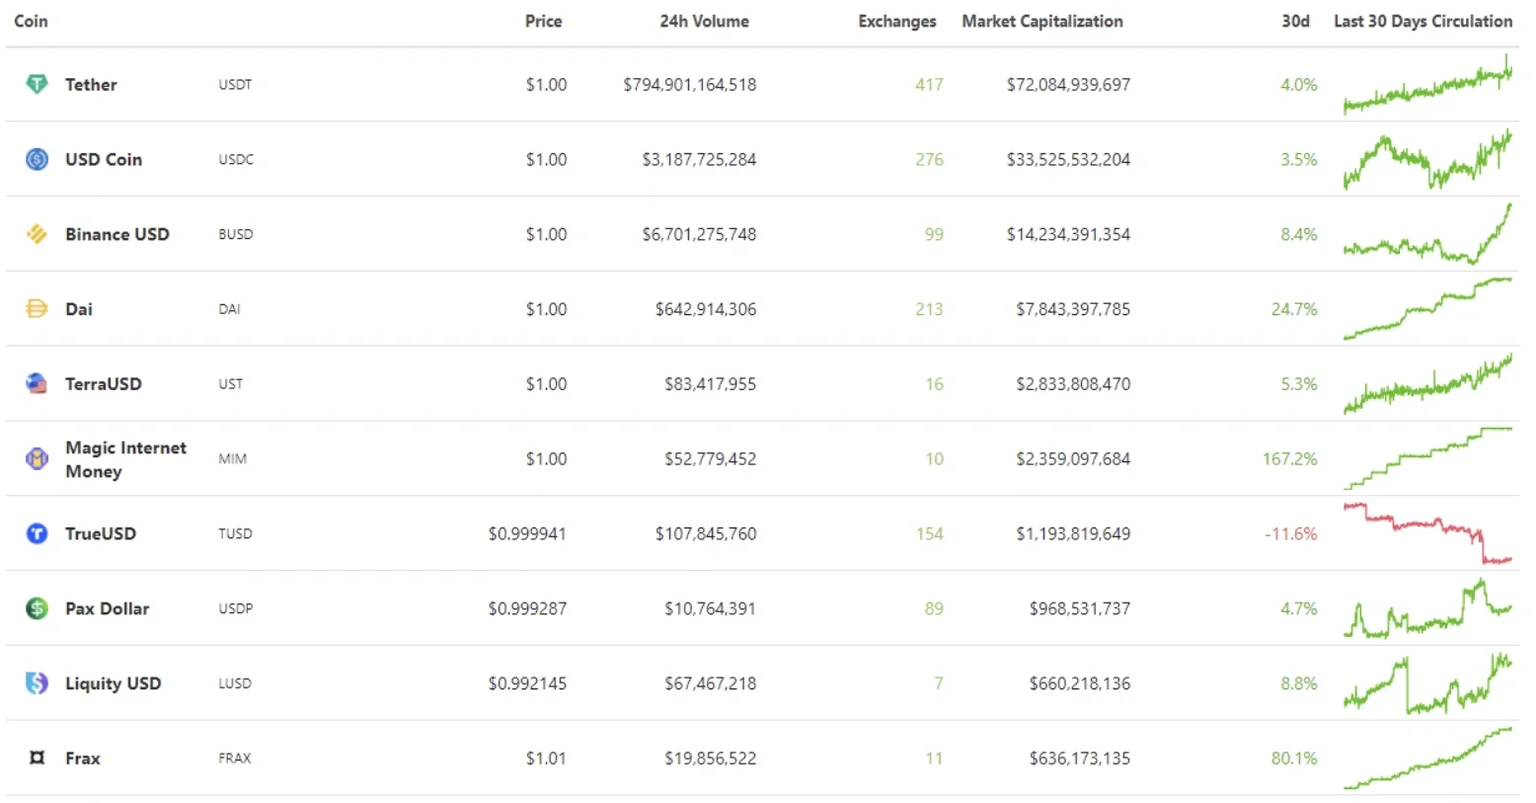 Dai is the fourth largest stablecoin, with a market cap of over $8 billion. Tether and USD Coin have market caps of $72 billion and $33 billion, respectively. Source: CoinGecko